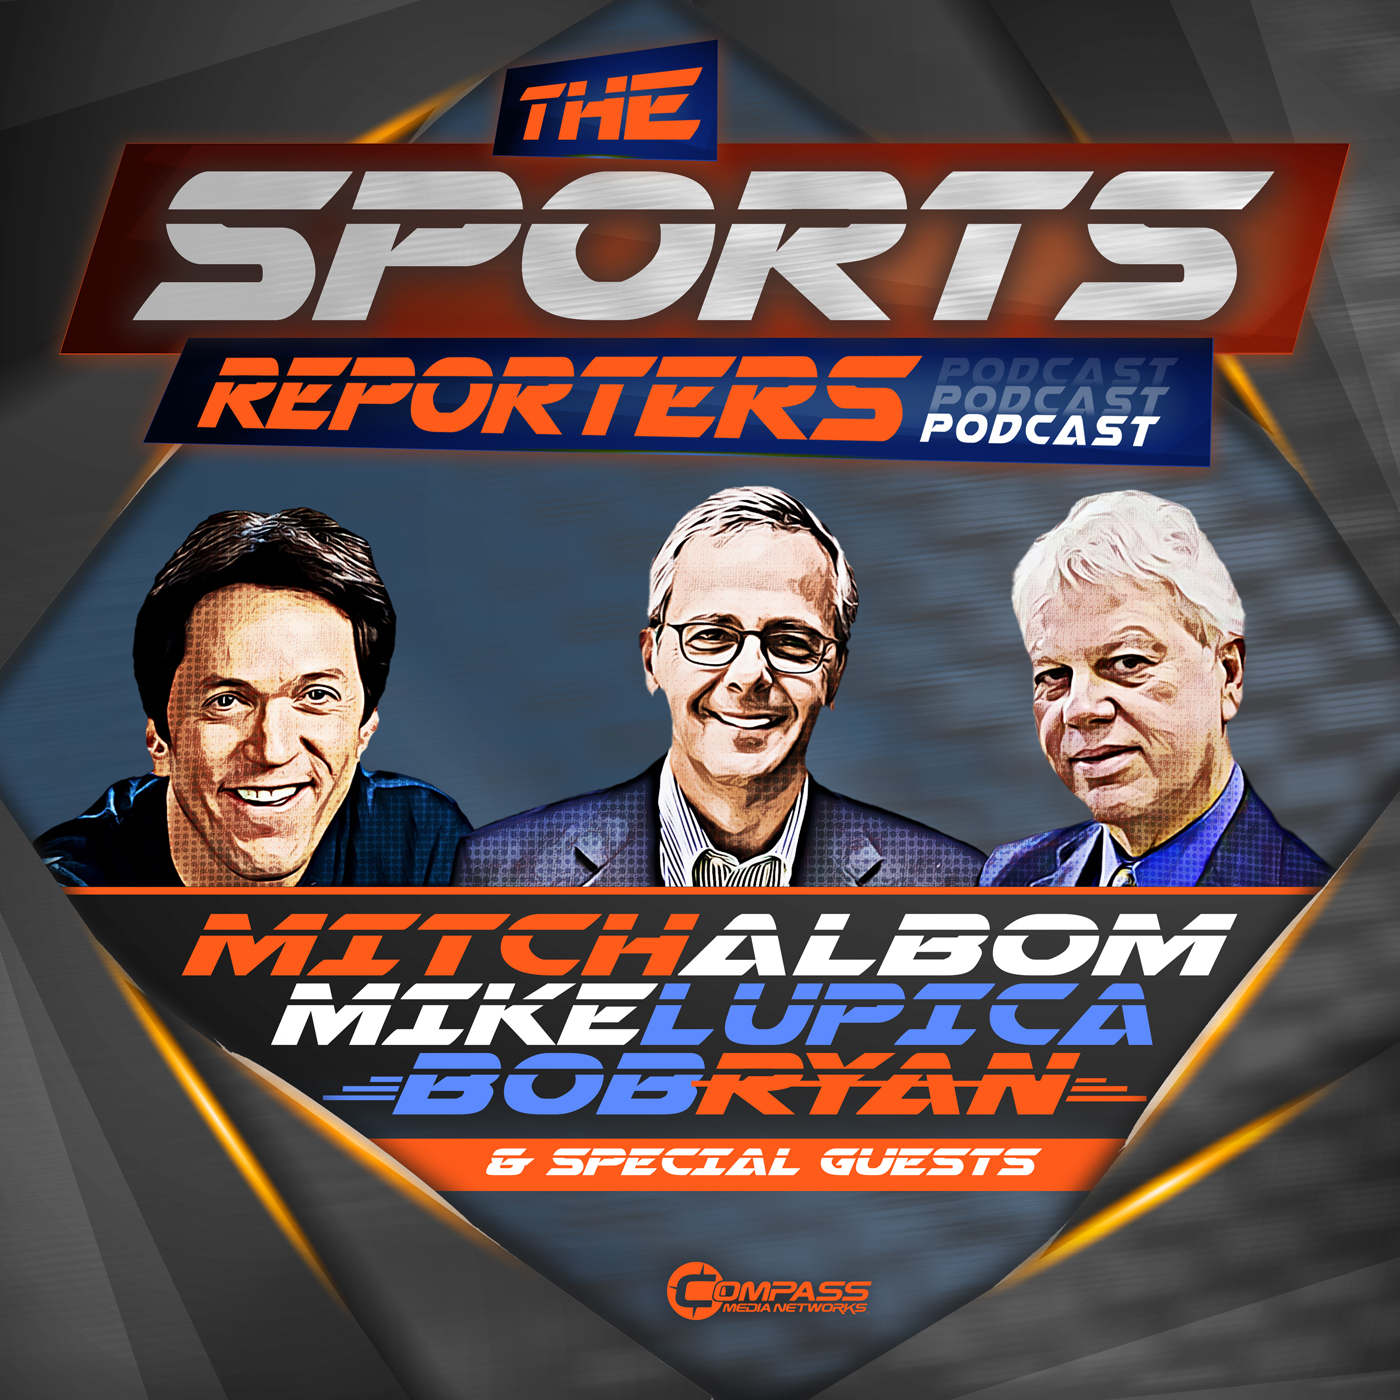 The Sports Reporters - Episode 194 - Two elites set to renew rivalry at Wimbledon. The second half of the baseball season. NBA commissioner weighs in